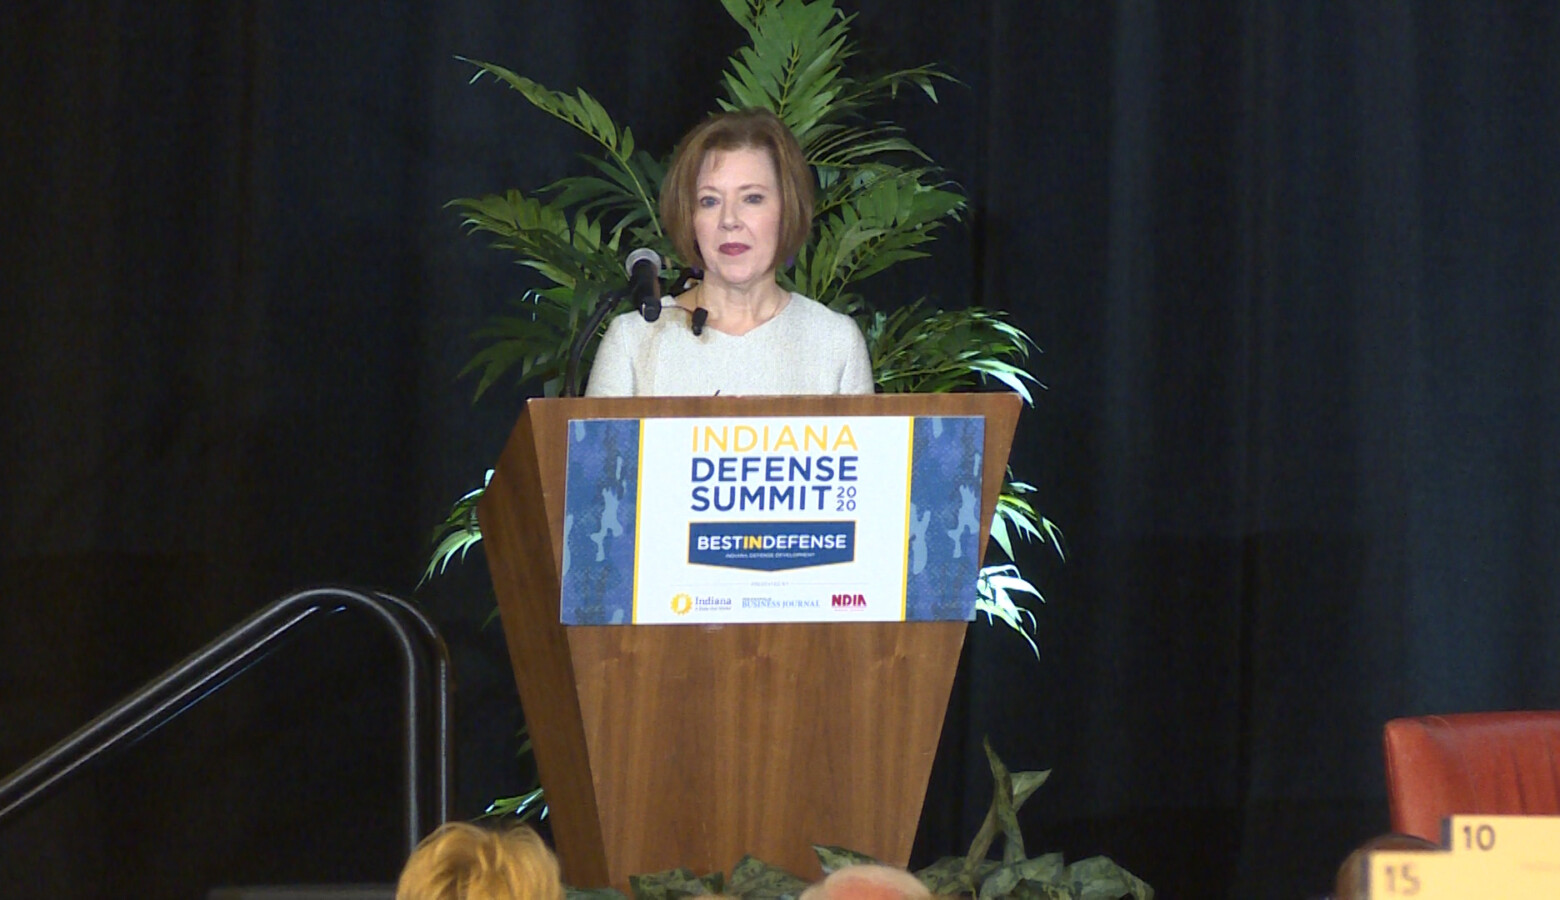 Department of Defense Chief Management Officer Lisa Hershman speaks at the inaugural Indiana Defense Summit held in Indianapolis. (Alan Mbathi/IPB News)